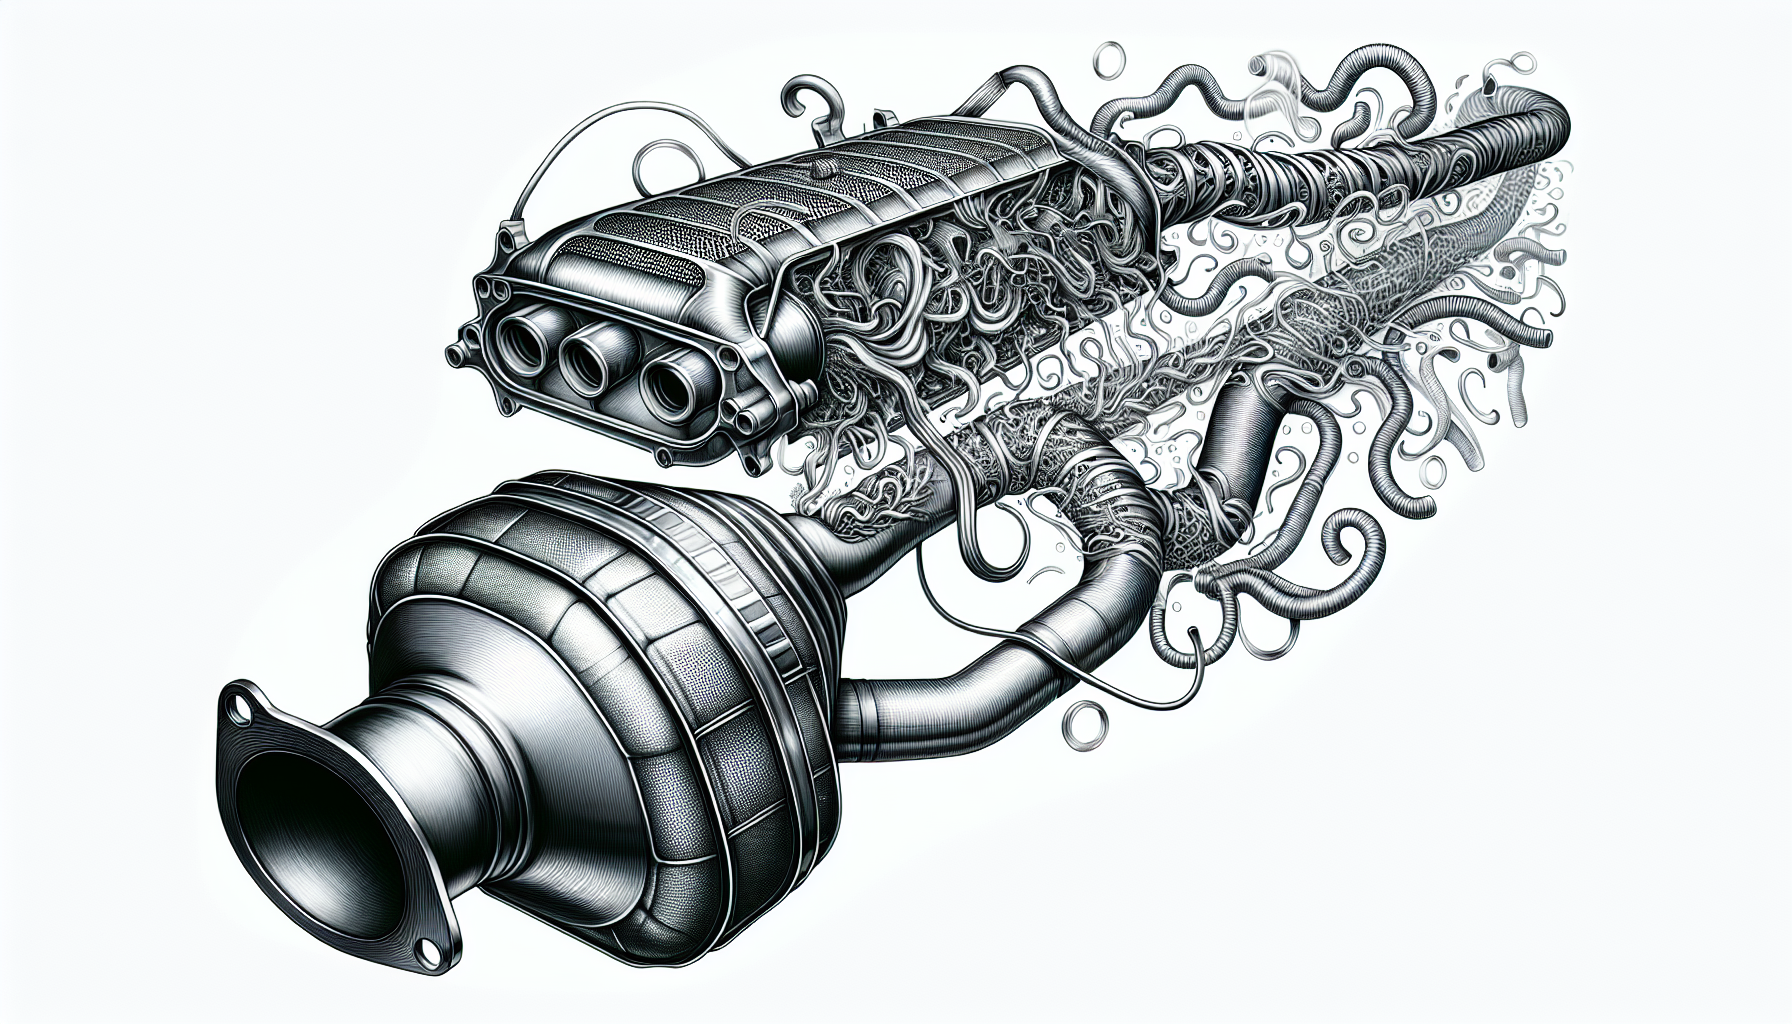 Illustration of a car's exhaust system with a catalytic converter